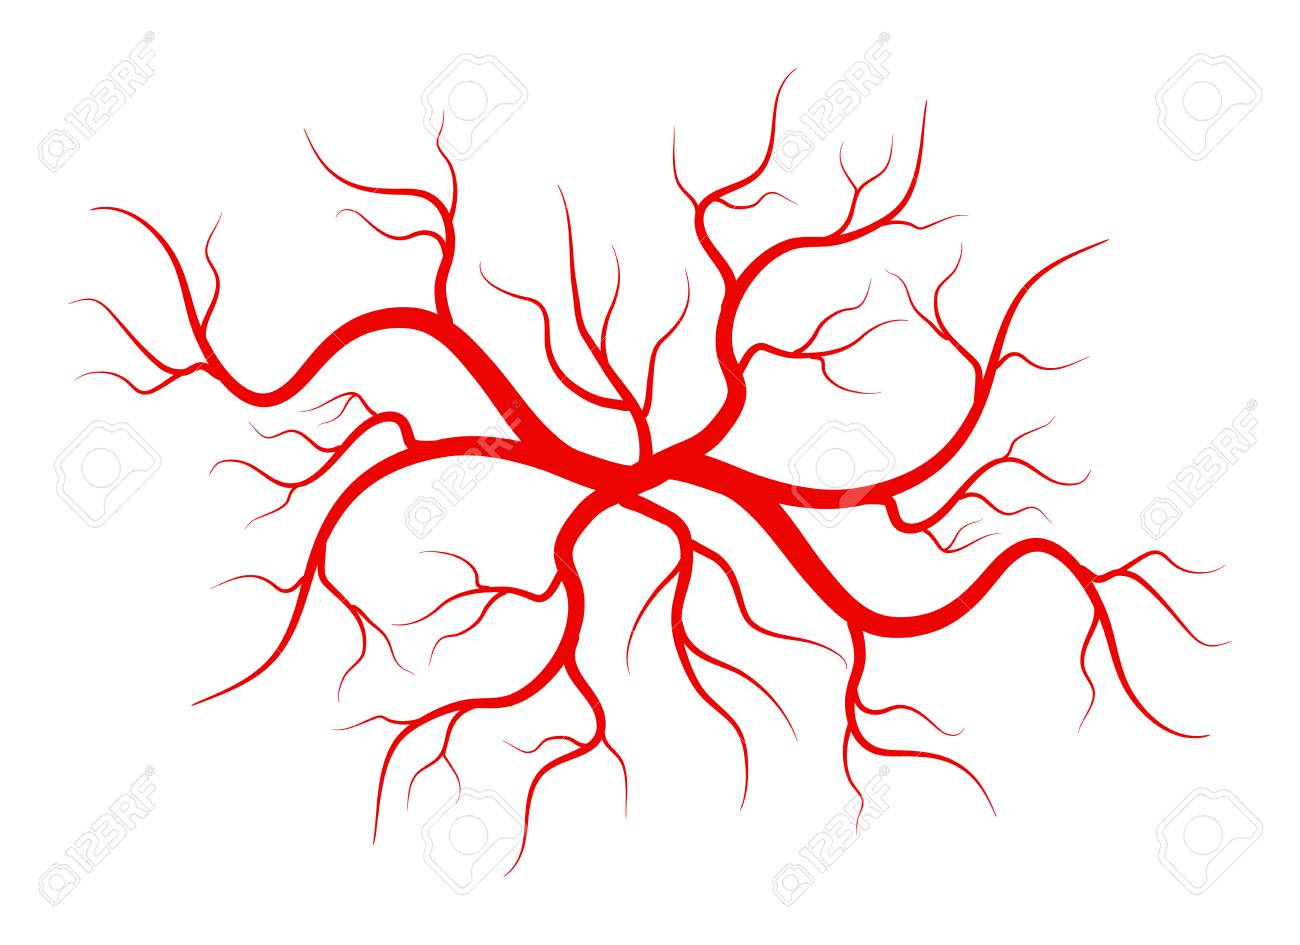 Creative Vector Illustration Of Red Veins Isolated On Background